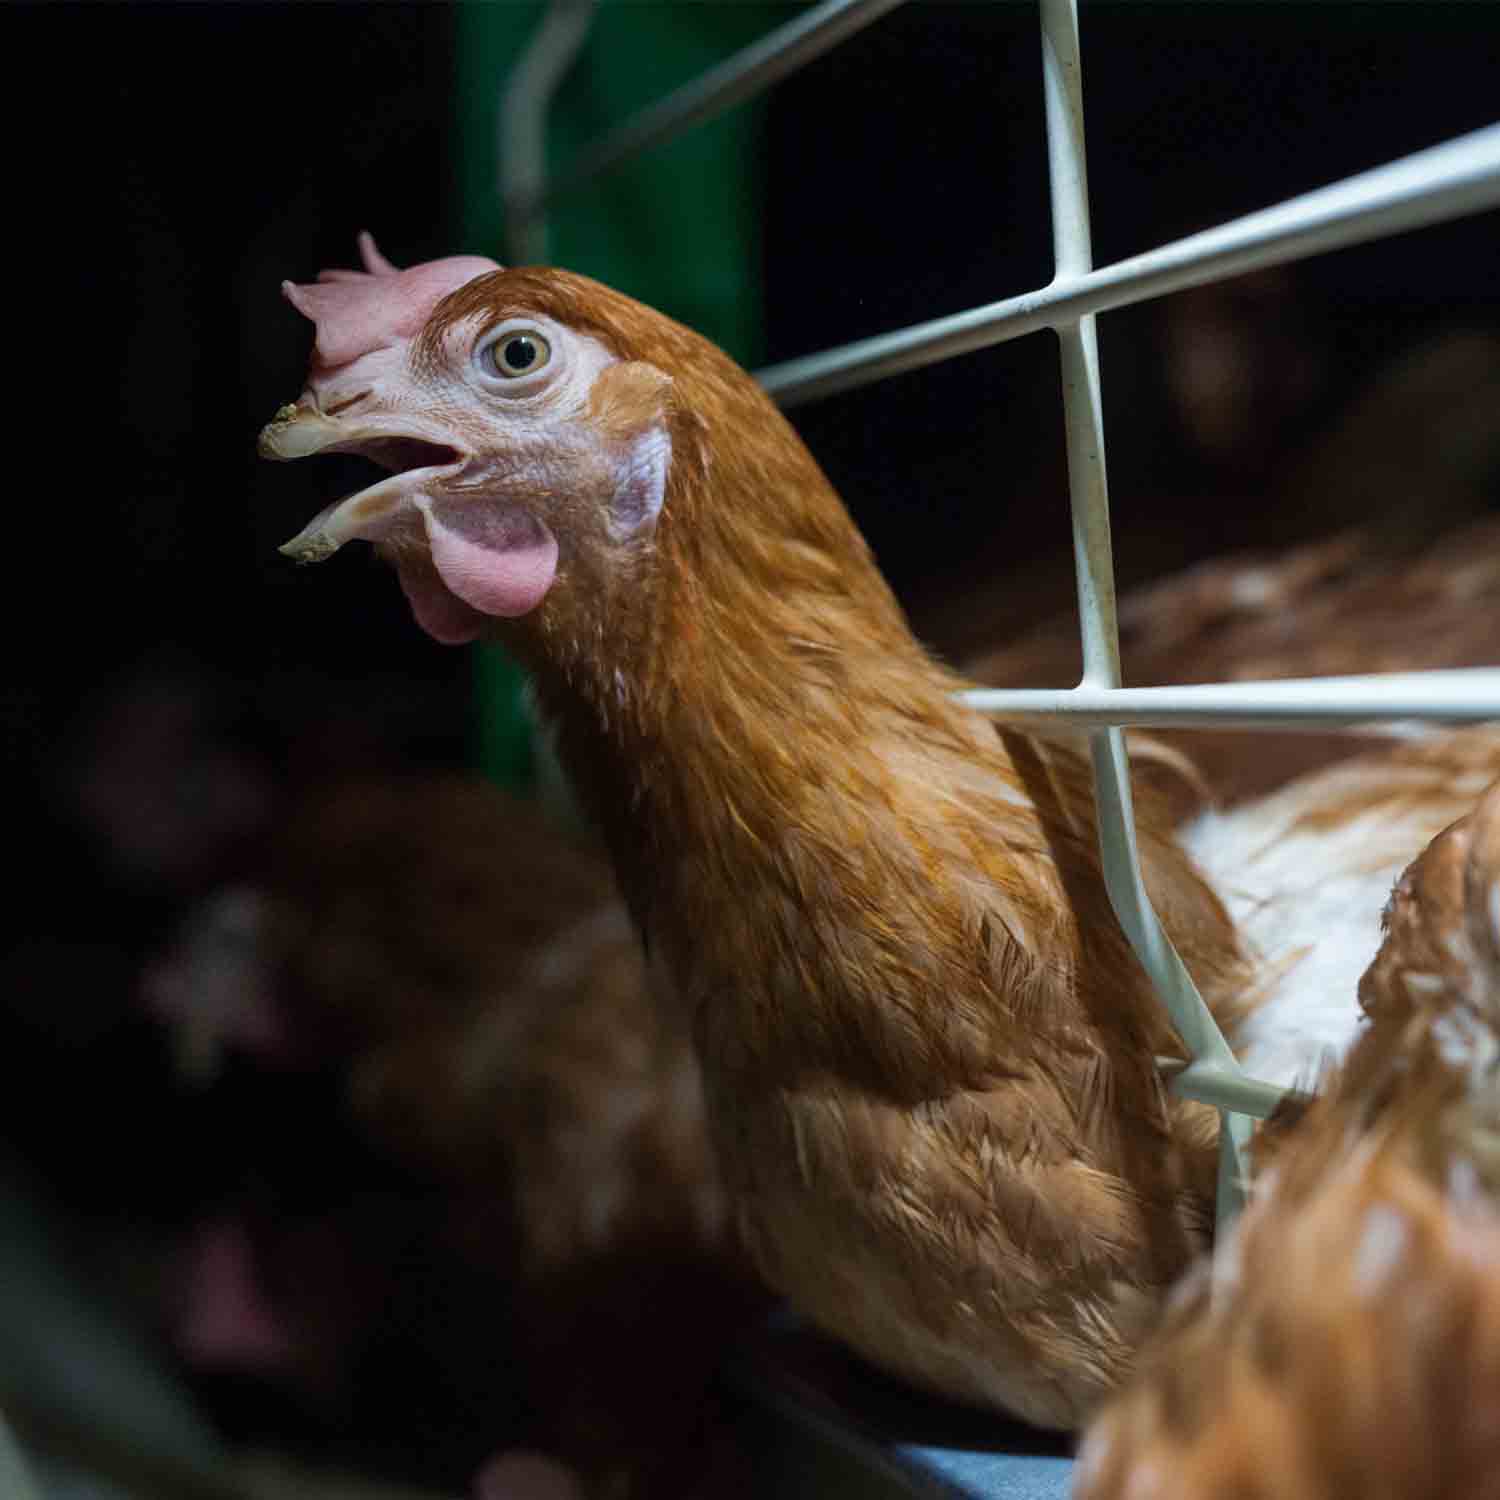 hen in cage news featured 1500x1500 1 Animal Equality Demands An End to Cages for Animals Worldwide